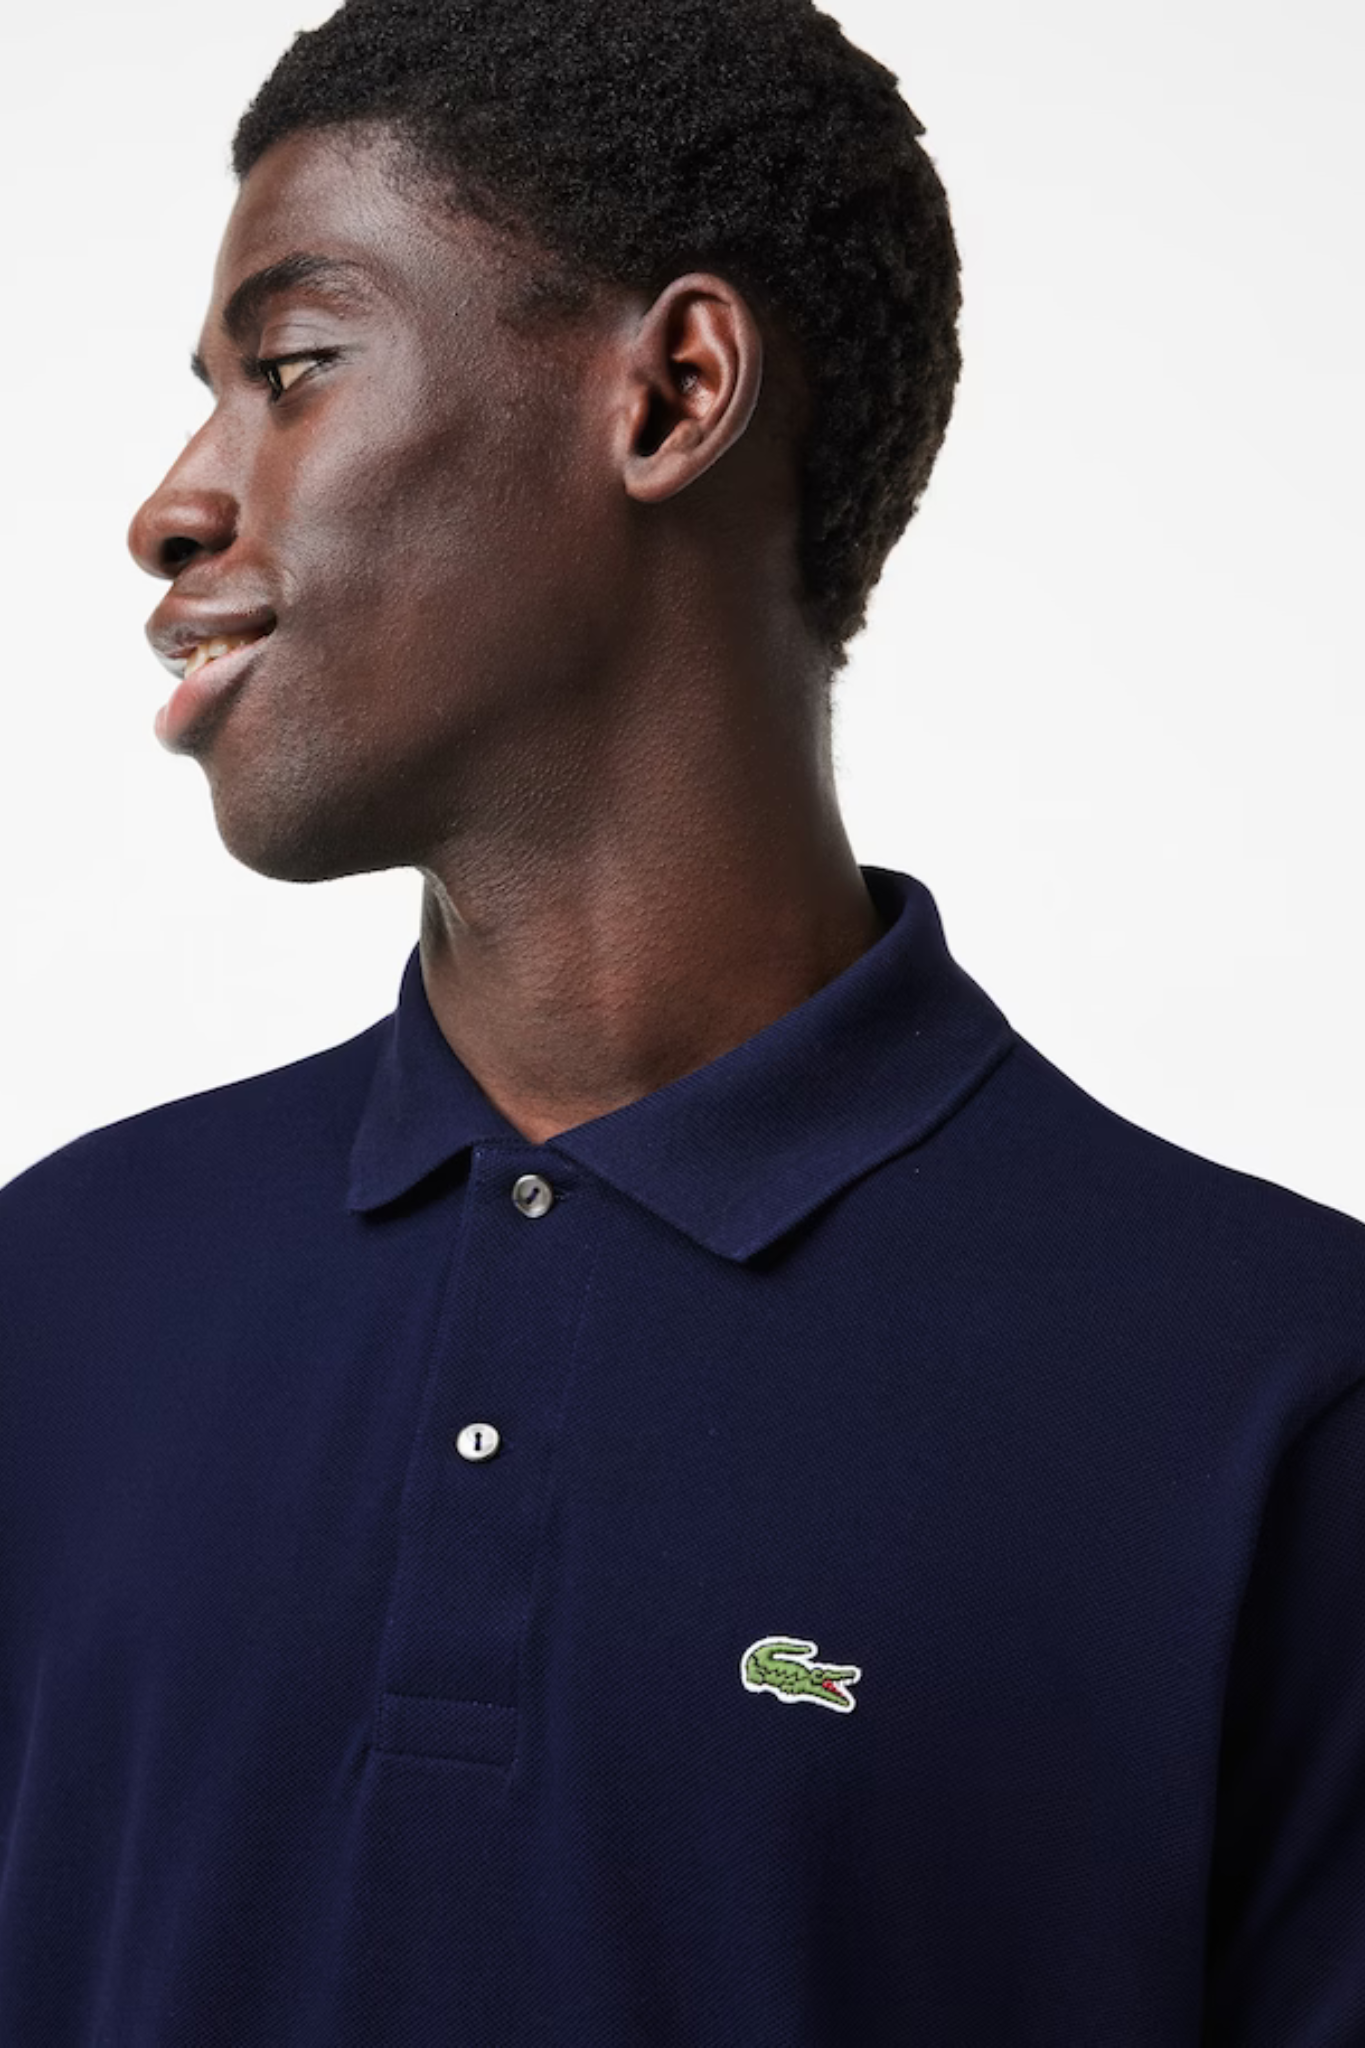 S/S BEST POLO 01 - NAVY BLUE